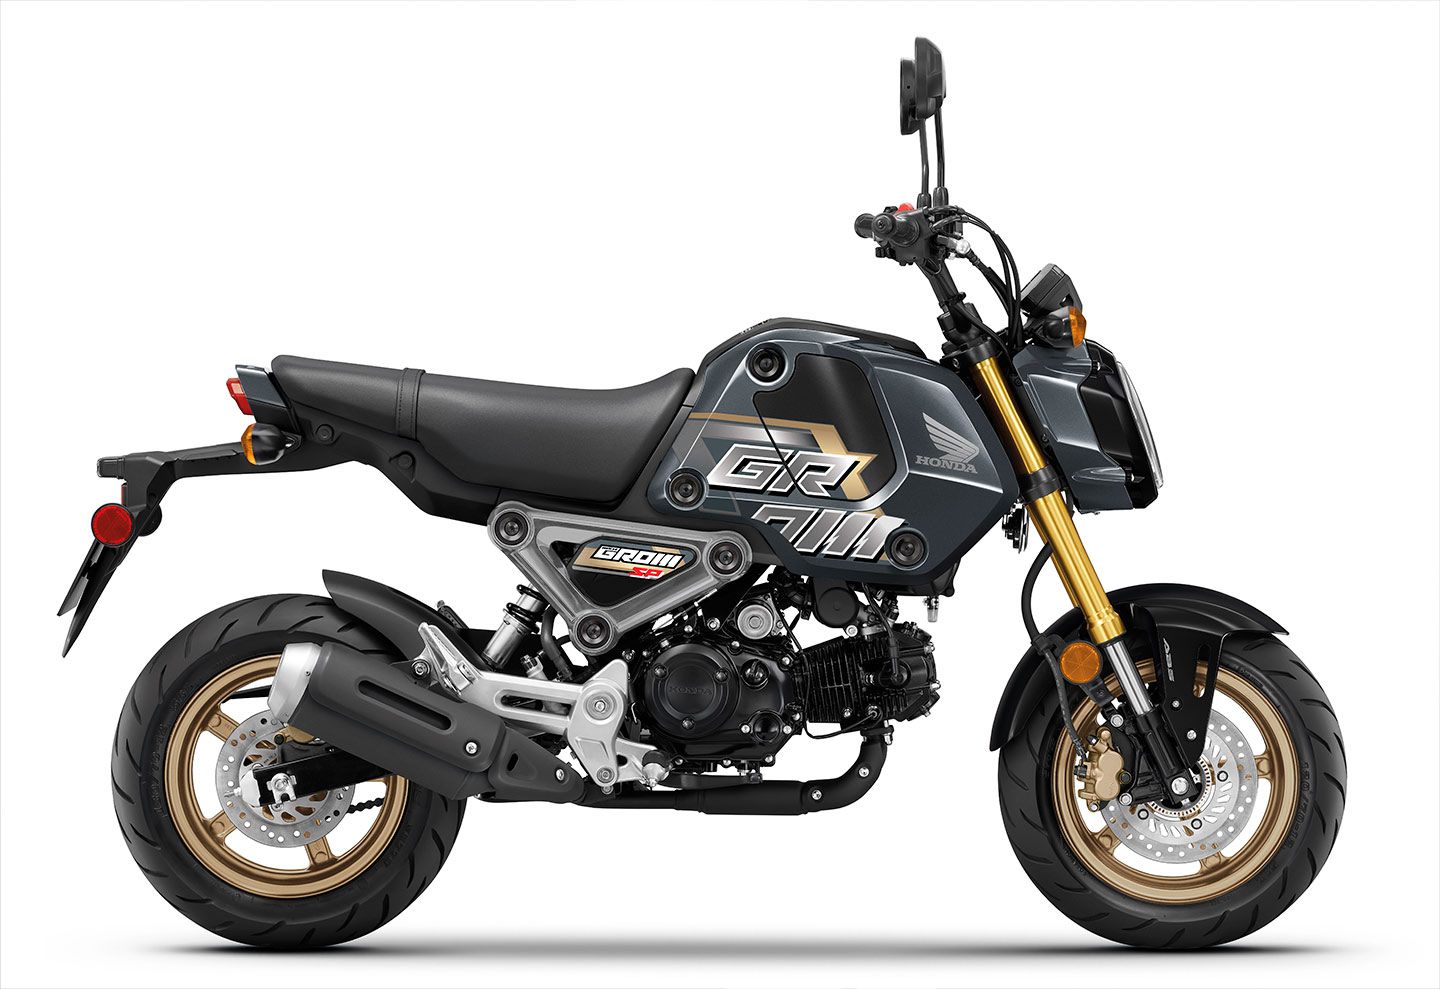 The latest Grom continues to have plenty of price appeal and it remains one of the easiest bikes to ride on the market.